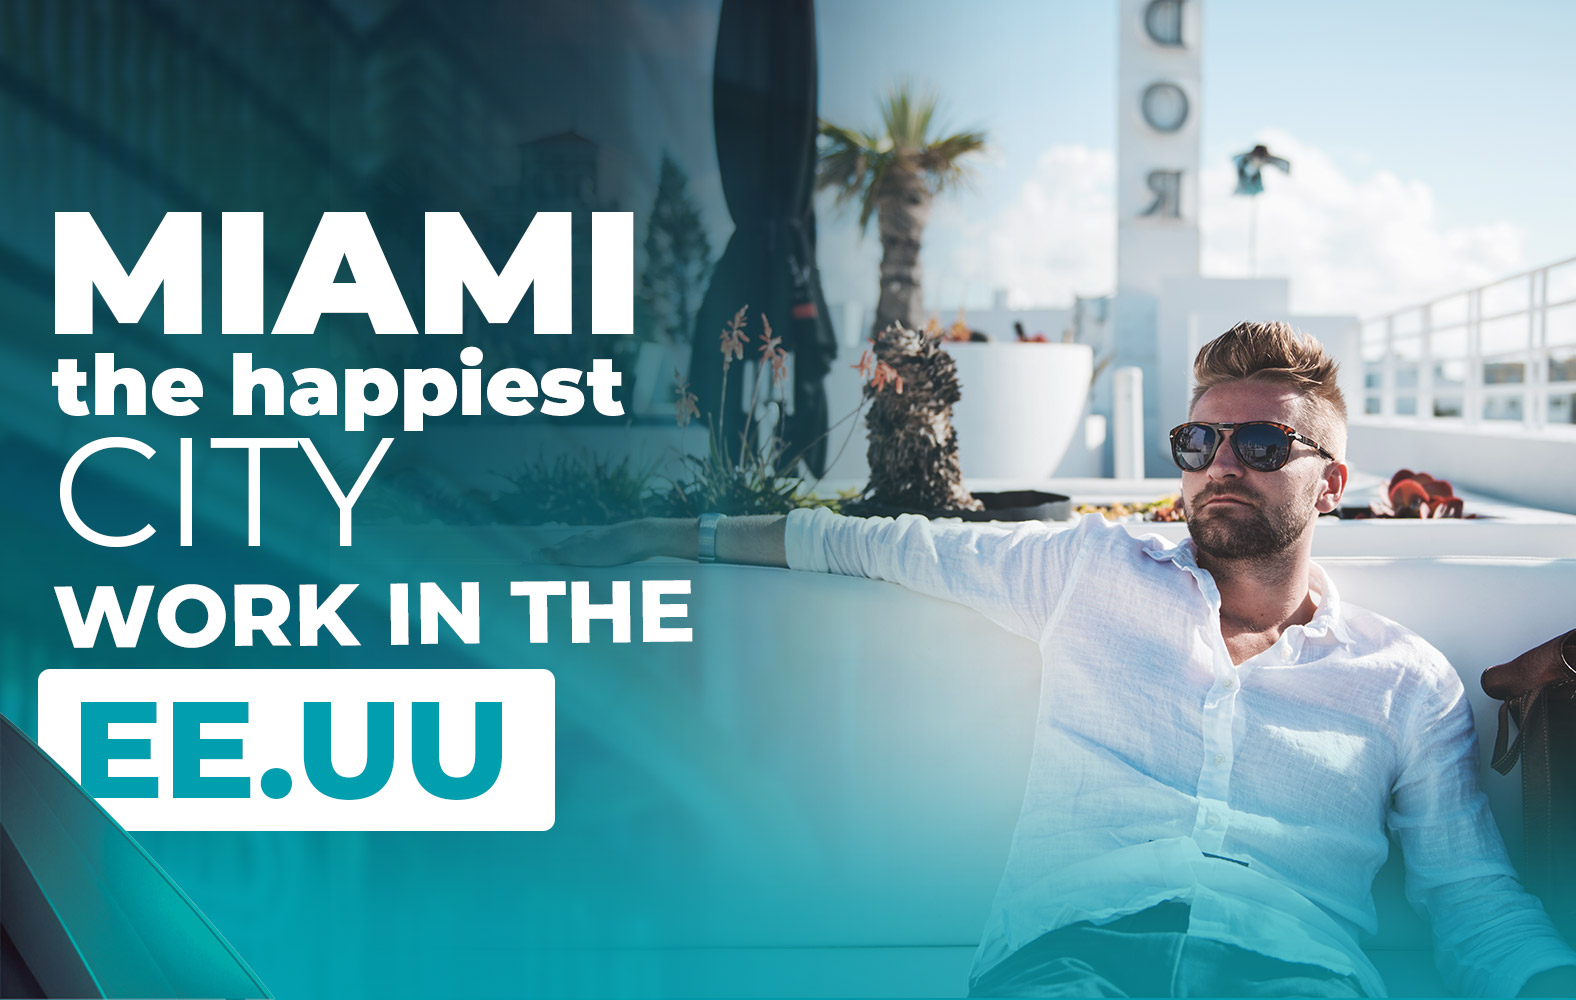 Miami is ideal to work